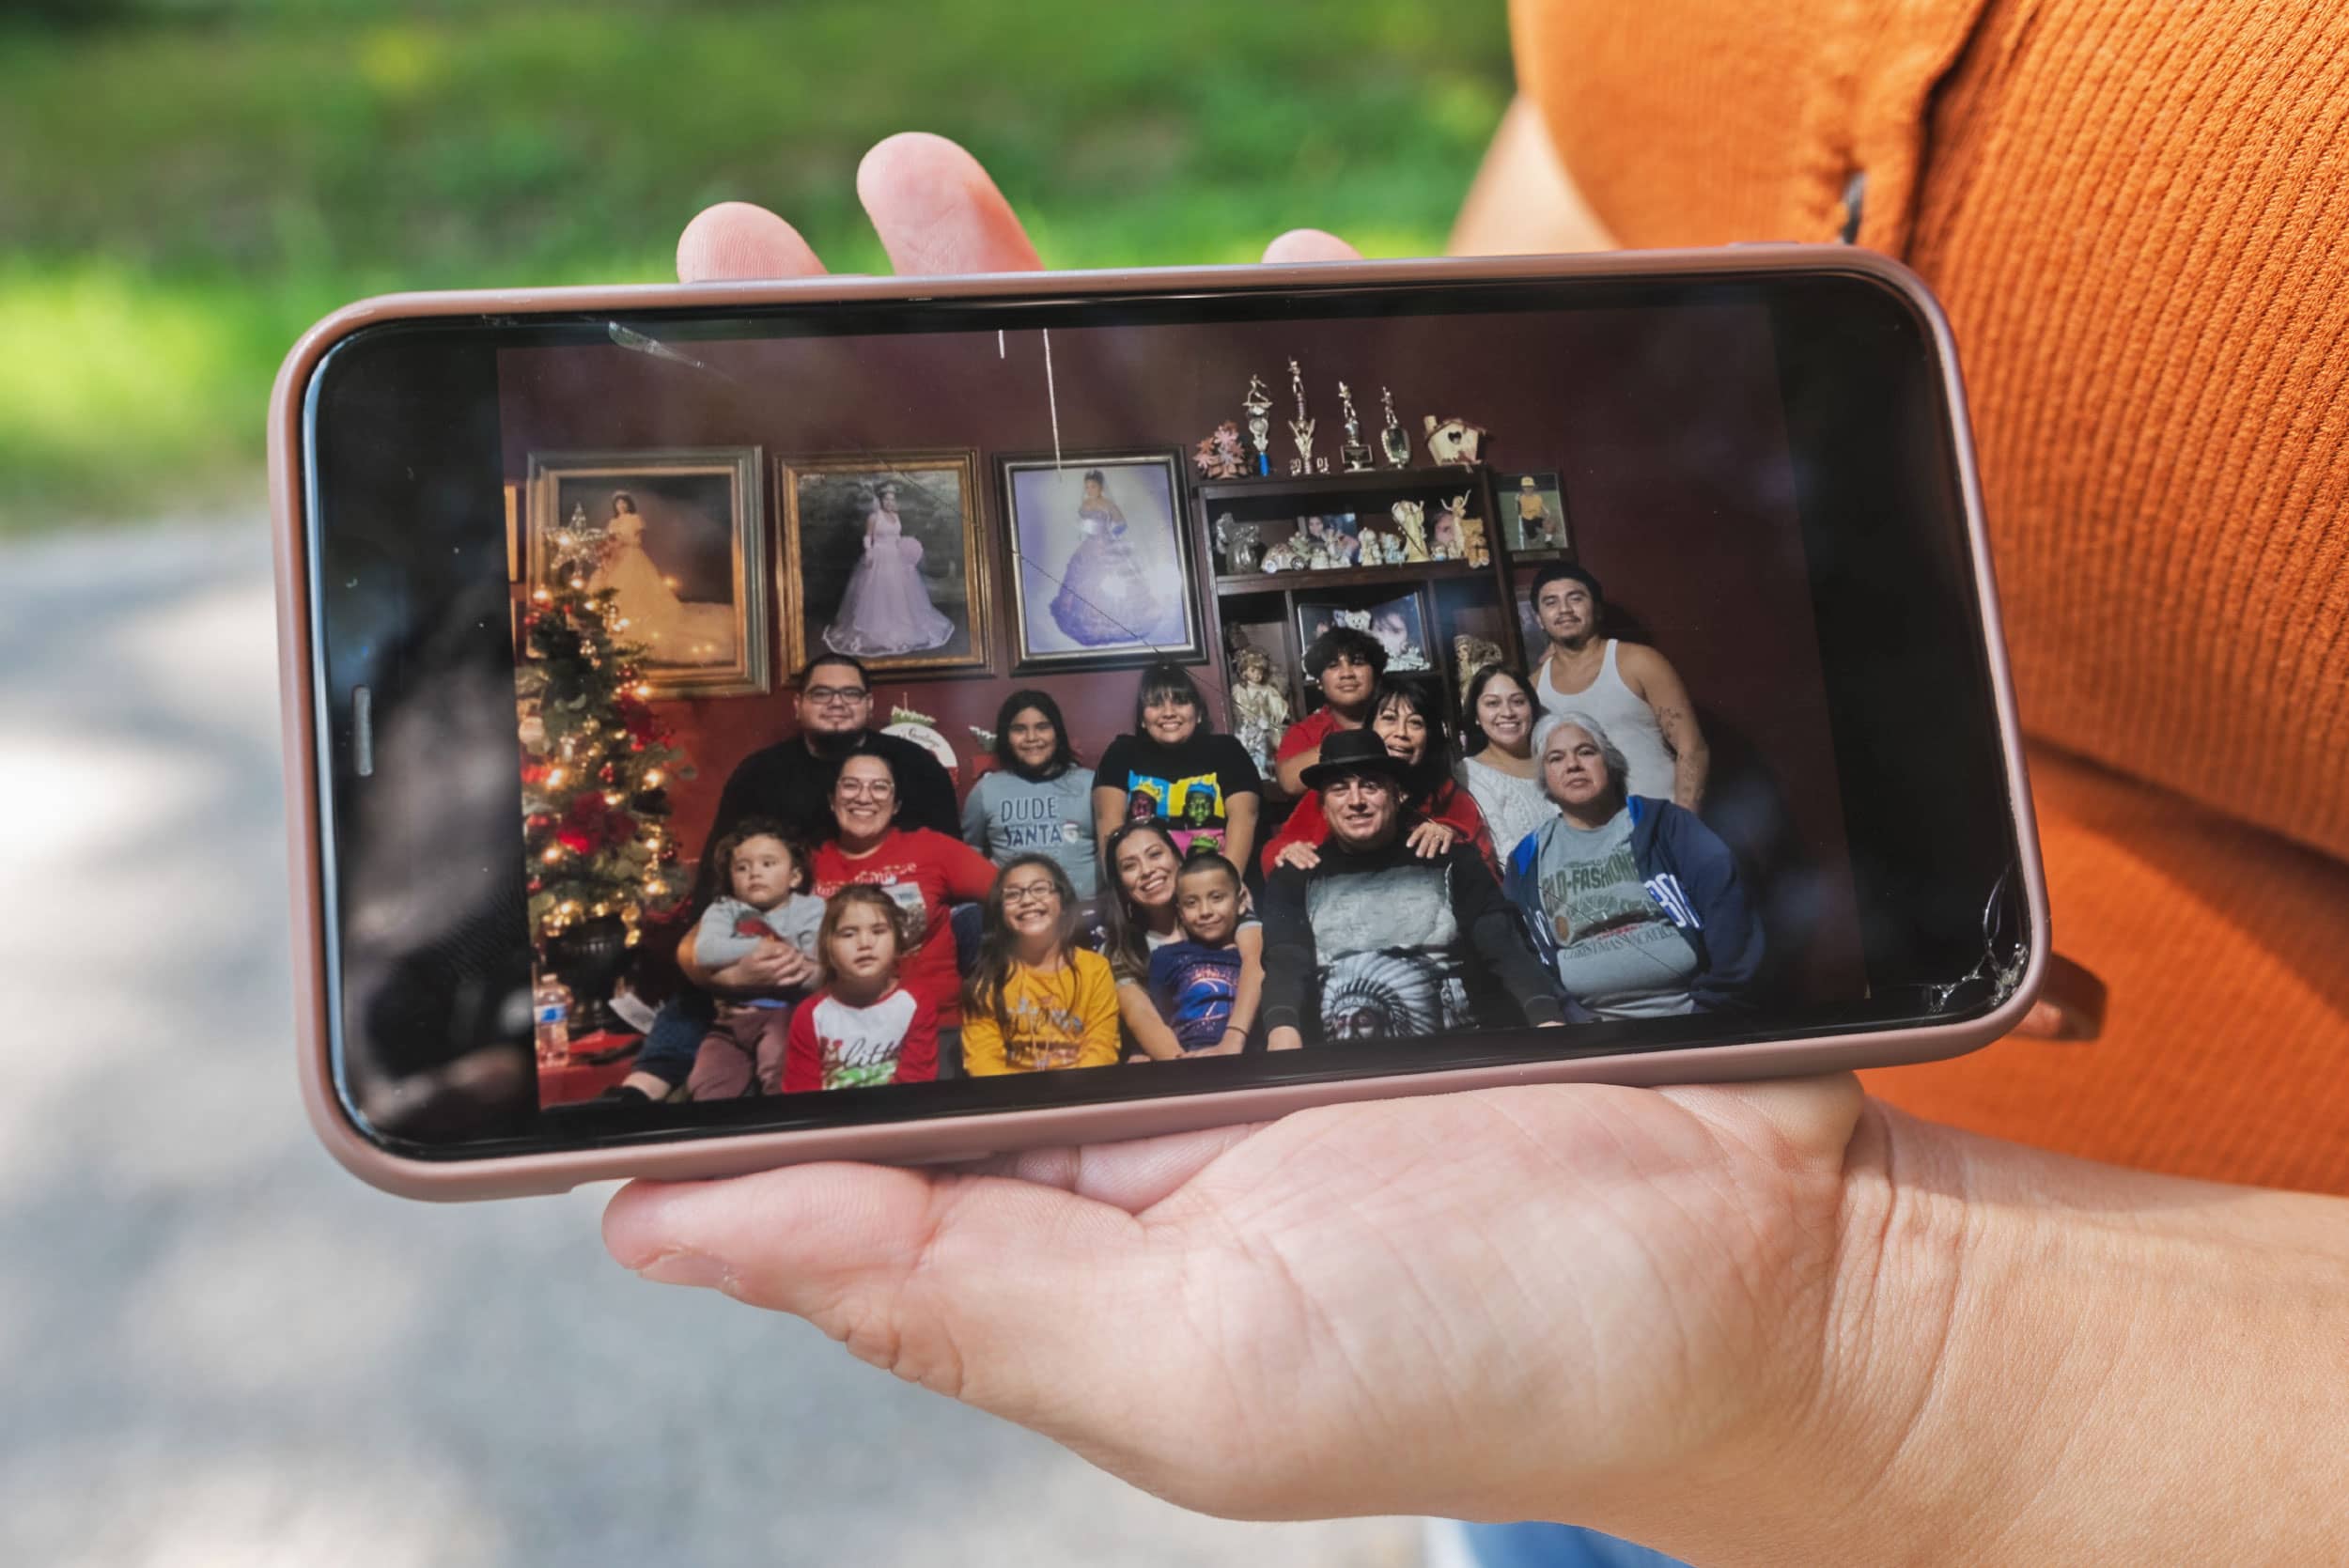 A woman uses her phone to show a photo of one of her family's final Christmases